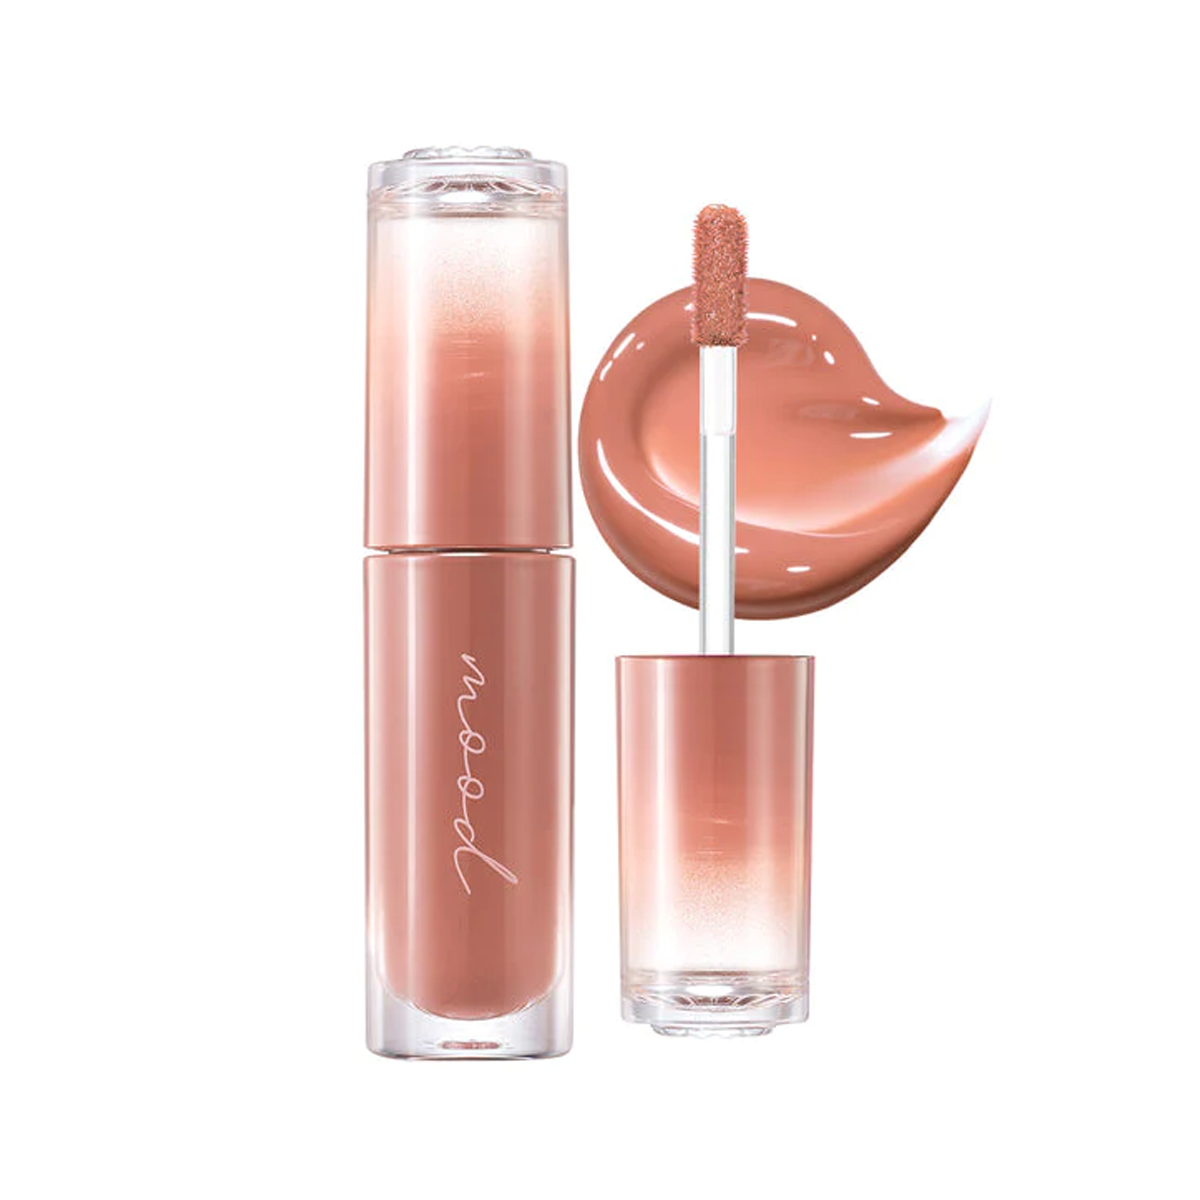 Peripera - Ink Mood Glowy Tint Honey K-ookie Collection